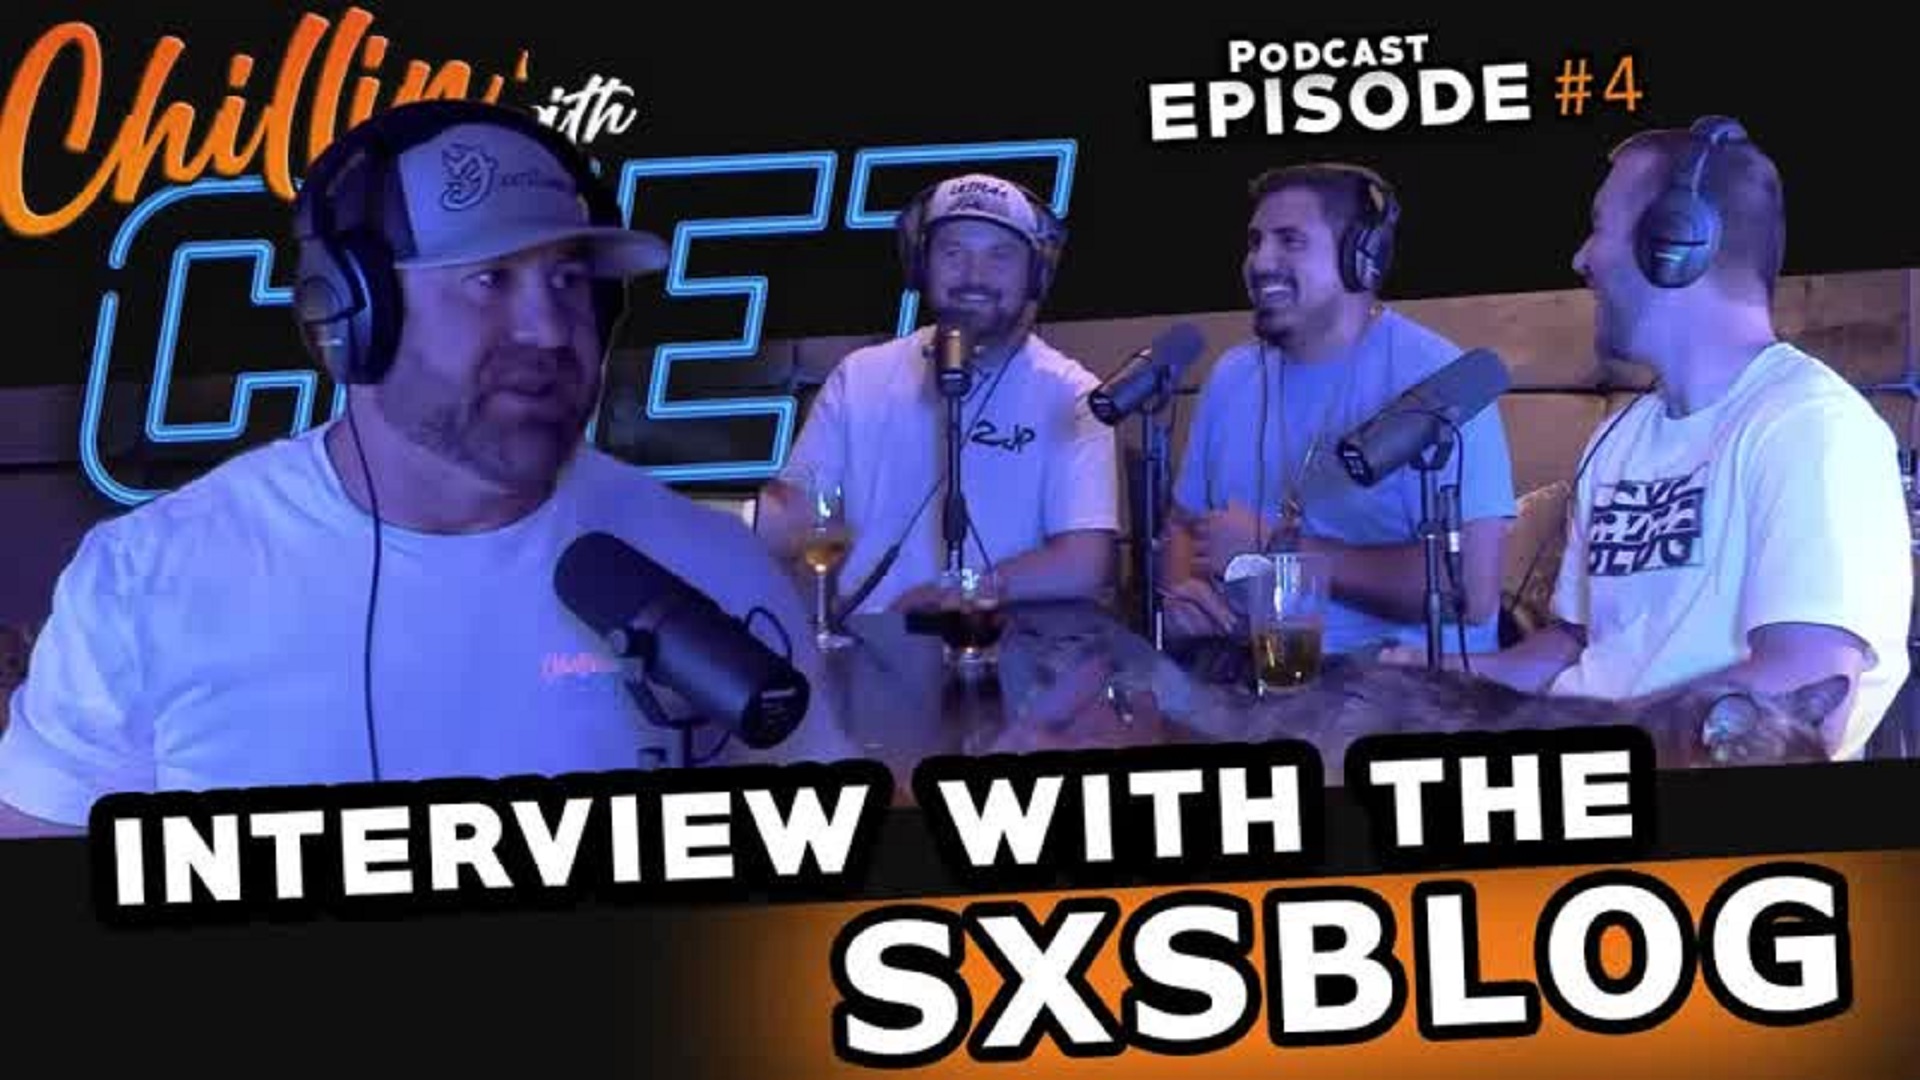 Getting to know the SXSBlog Guys | Chillin’ with Chet Podcast Episode #4